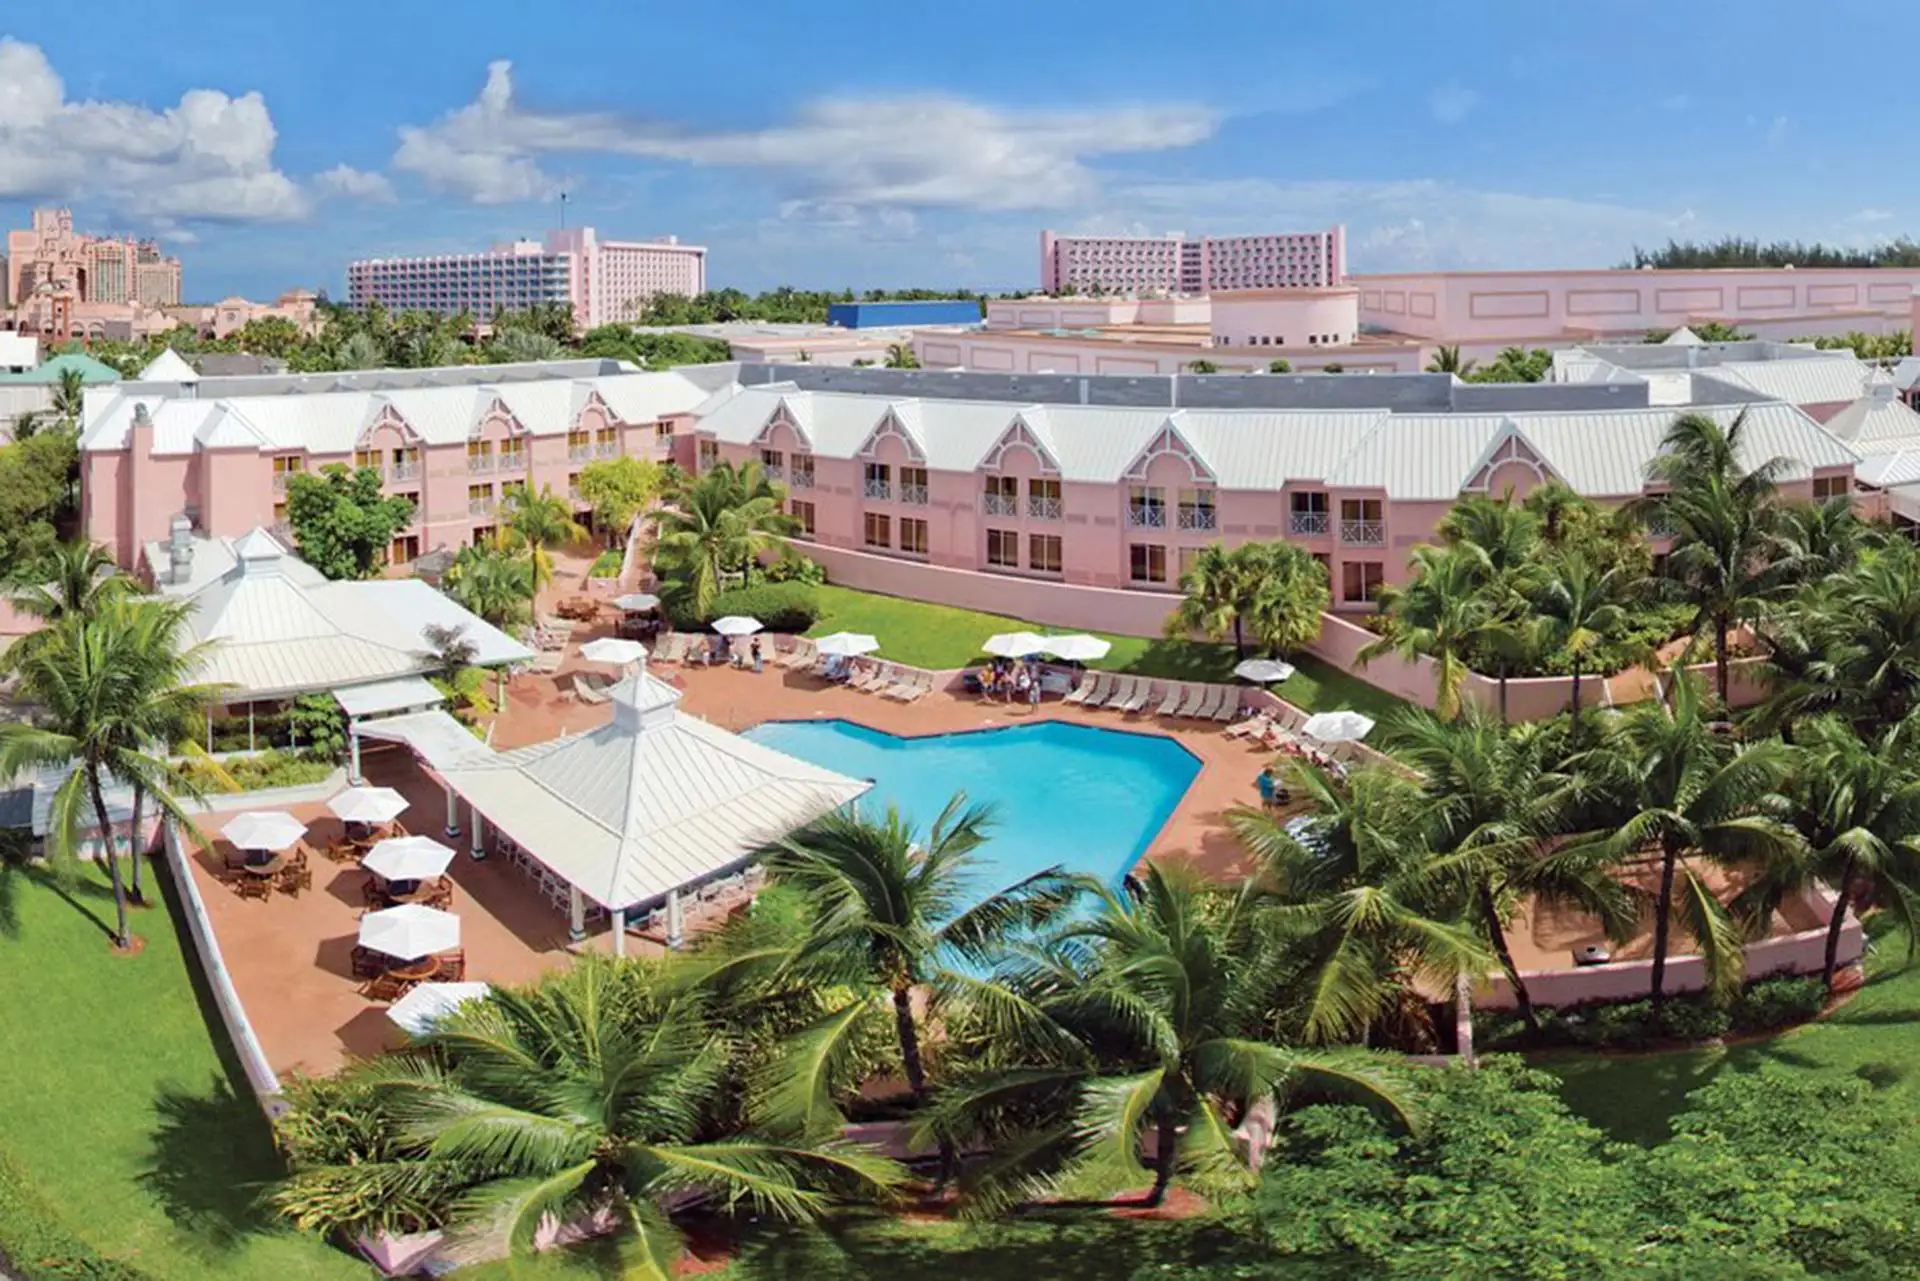 Comfort Suites Paradise Island in the Bahamas; Photo Courtesy of Comfort Suites Paradise Island